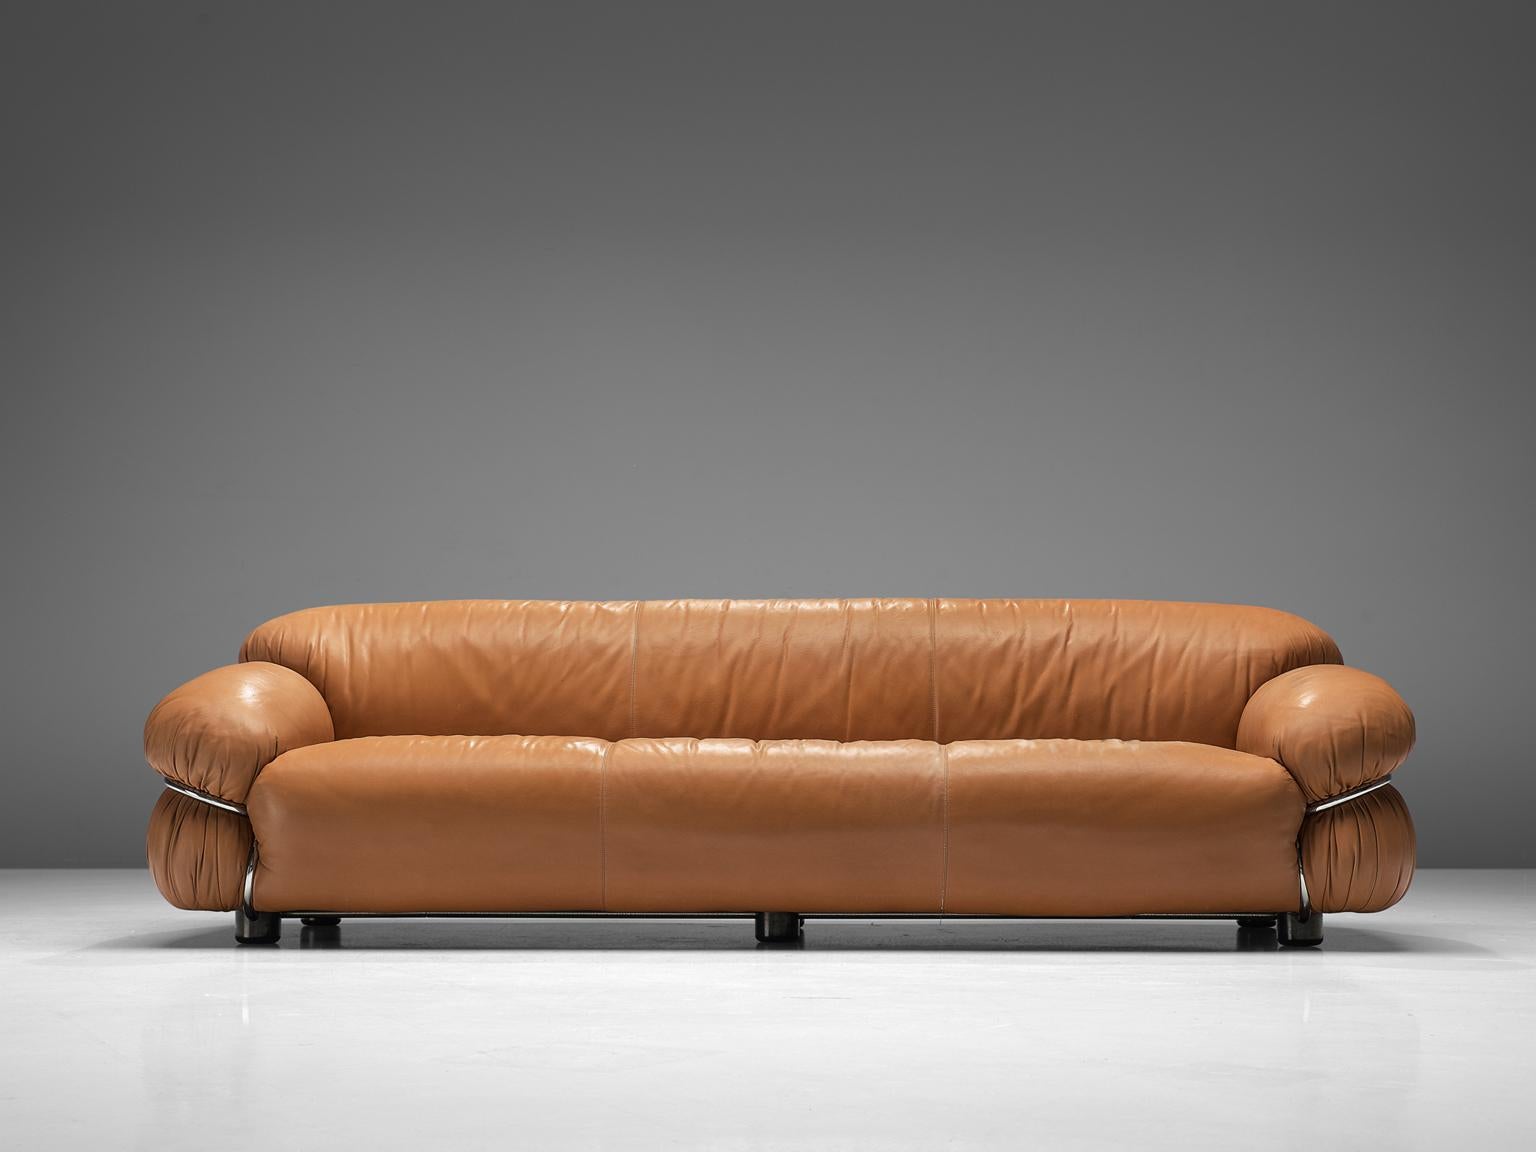 Gianfranco Frattini for Cassina, sofa 'Sesann', cognac leather and chrome-plated steel, Italy, 1969

This postmodern sofa is designed by Gianfranco Frattini, the 'Sesann' works from the idea of informal sitting where everything has a soft line and